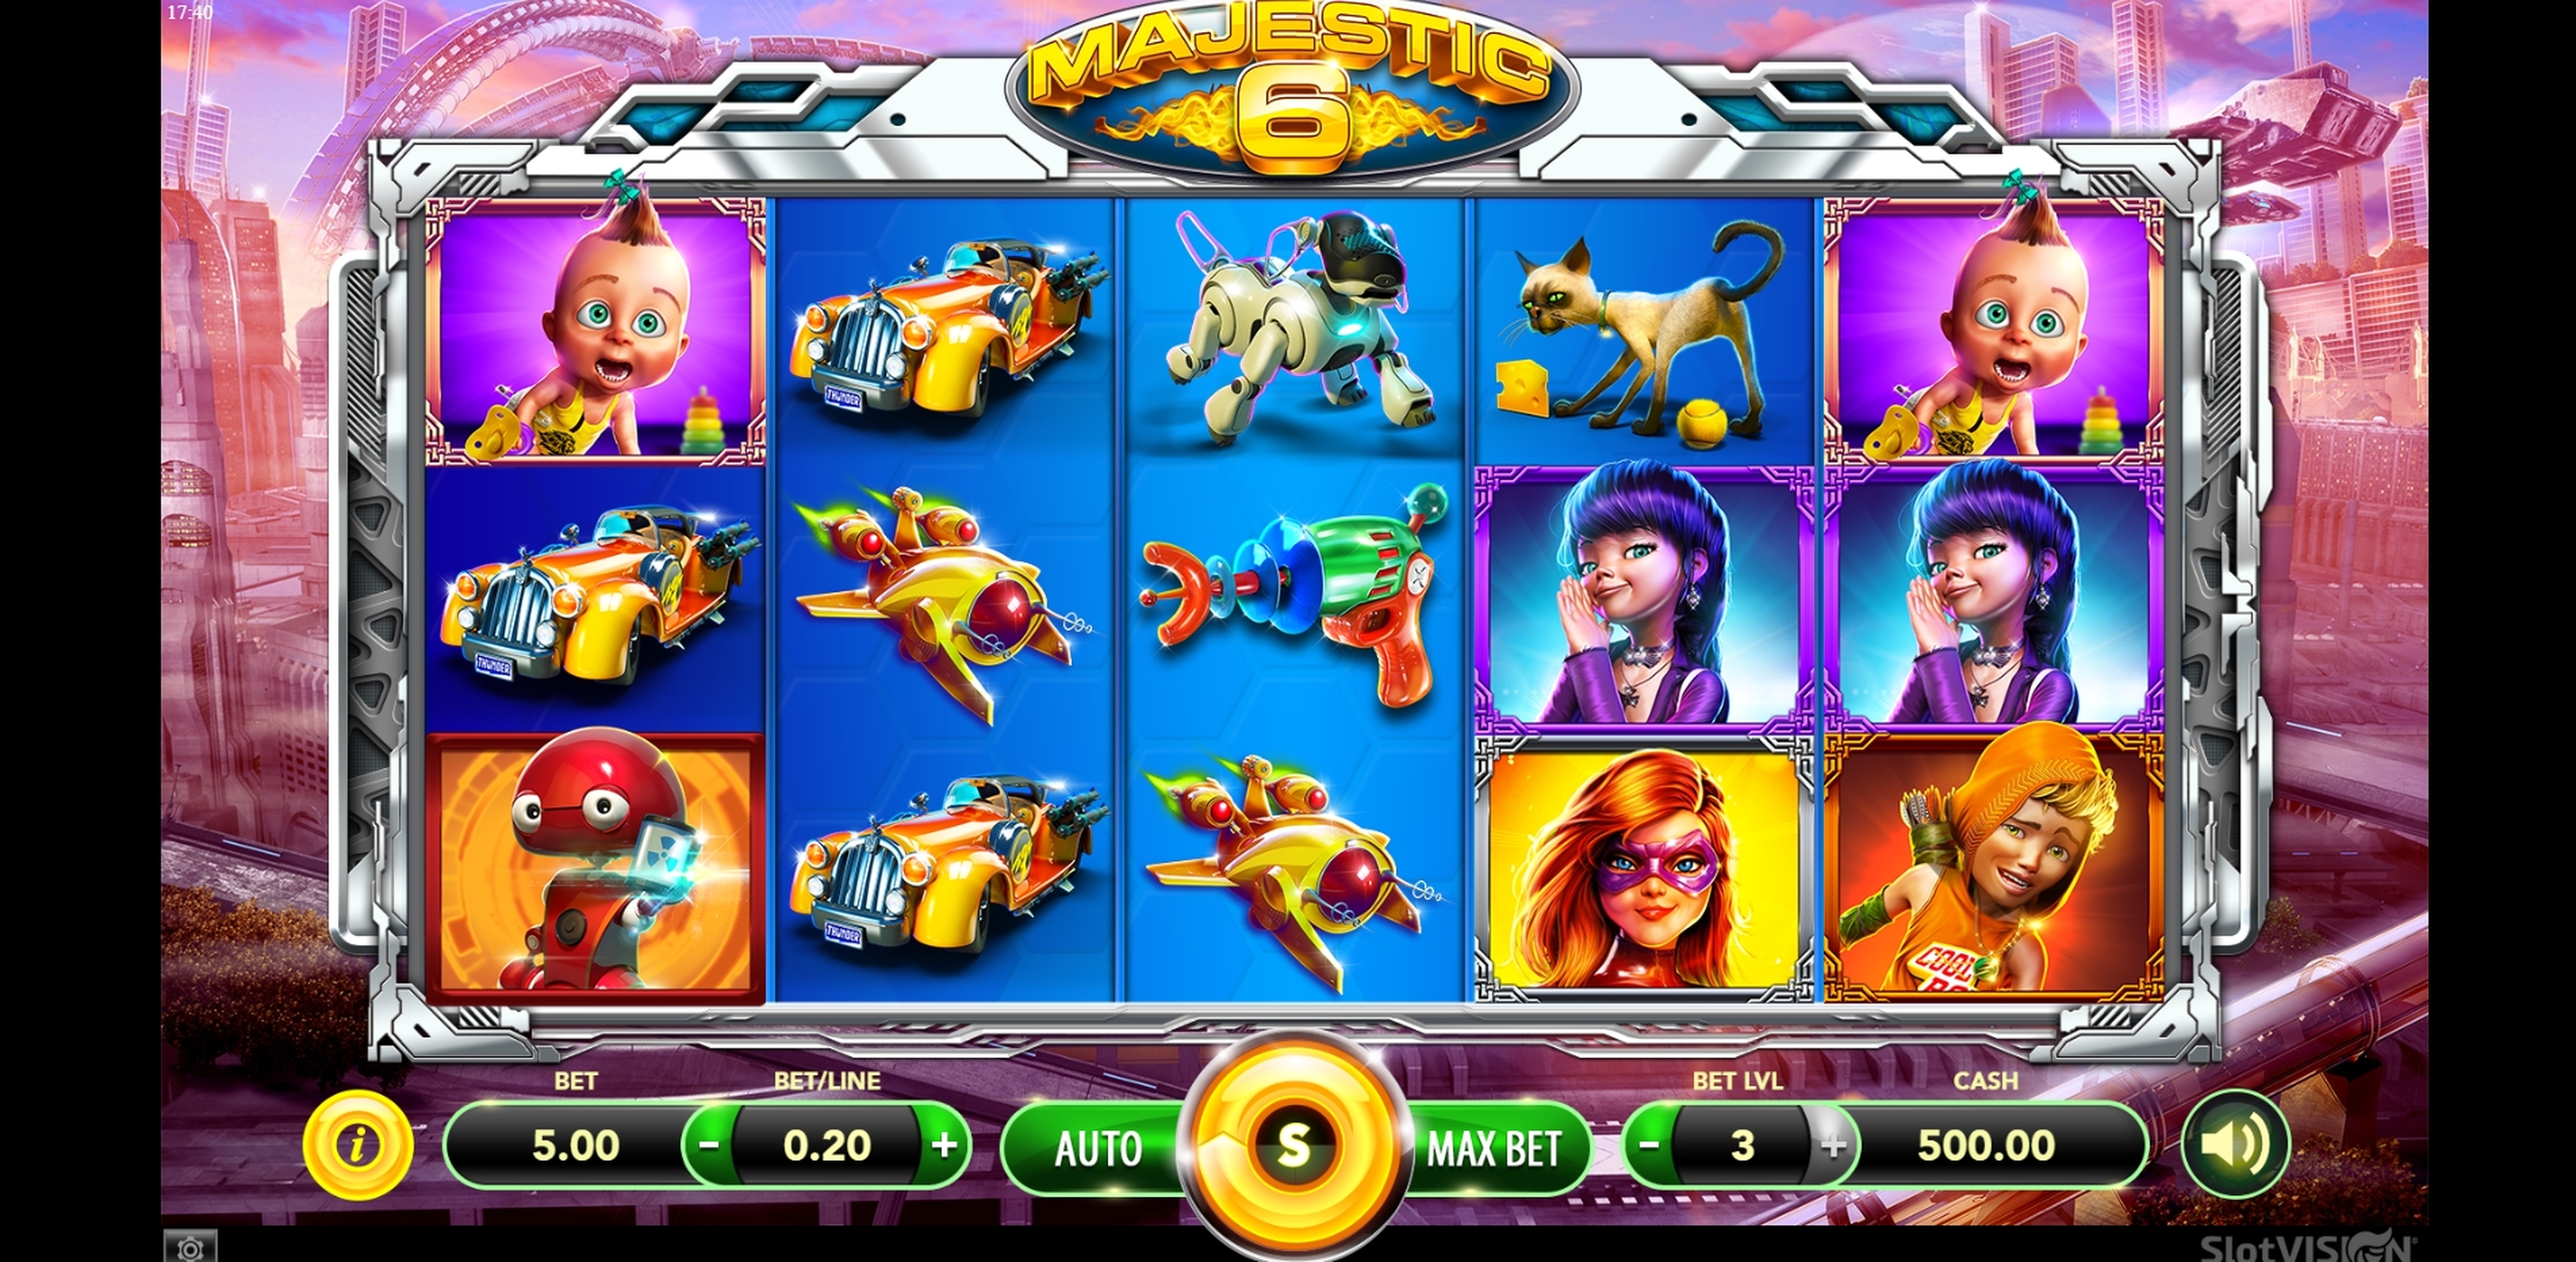 Reels in Majestic 6 Slot Game by SlotVision